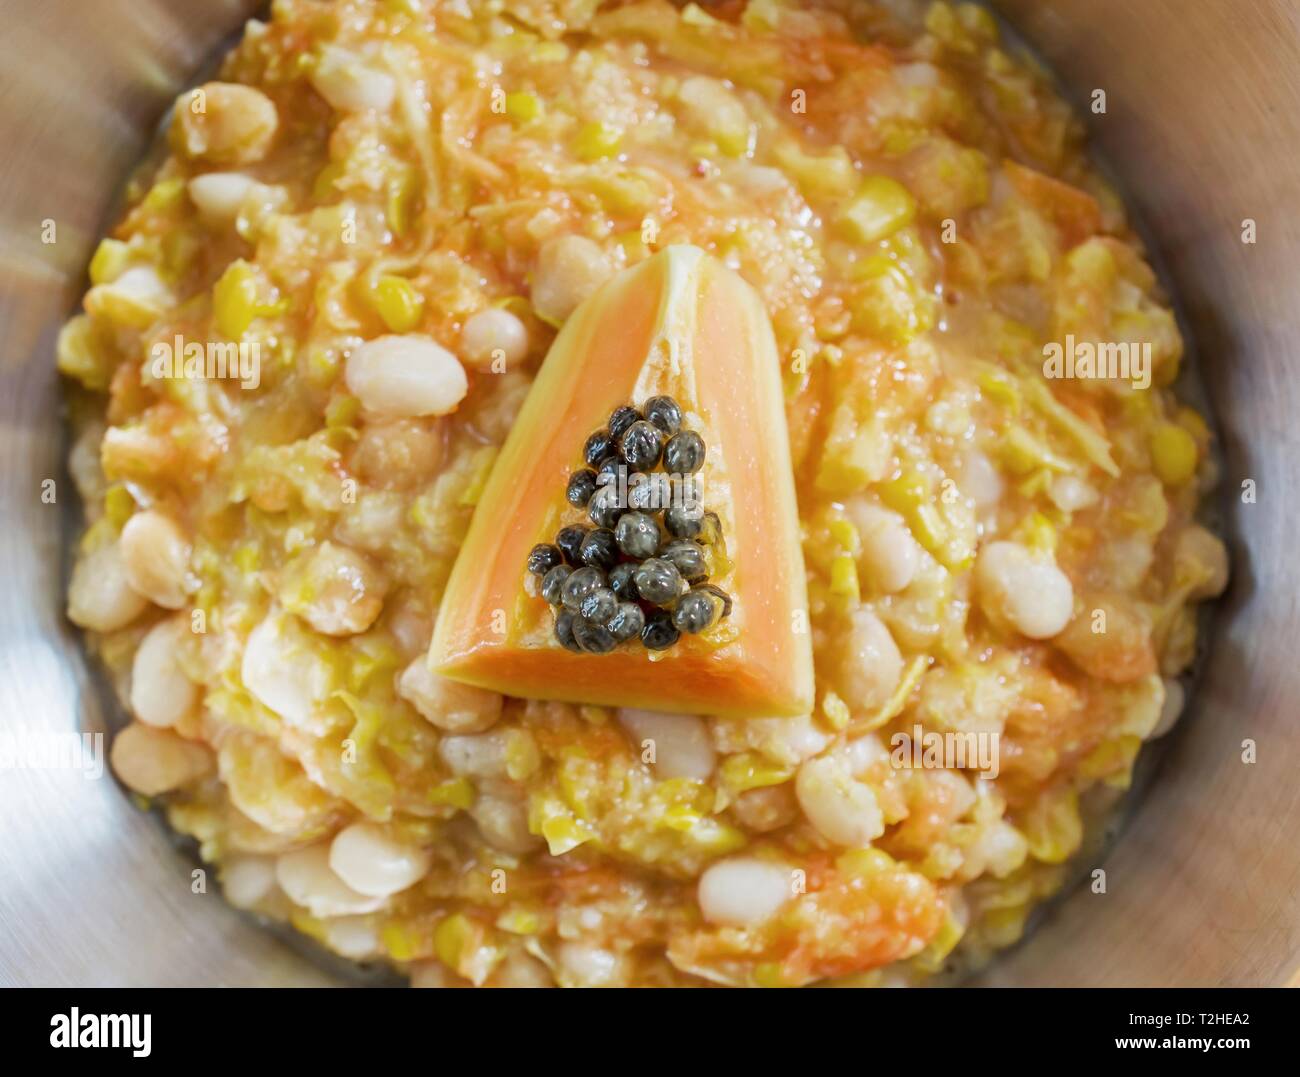 Boiled corn with papaya and chickpeas, dish from Timor Leste, Asian cuisine, East Timor Stock Photo